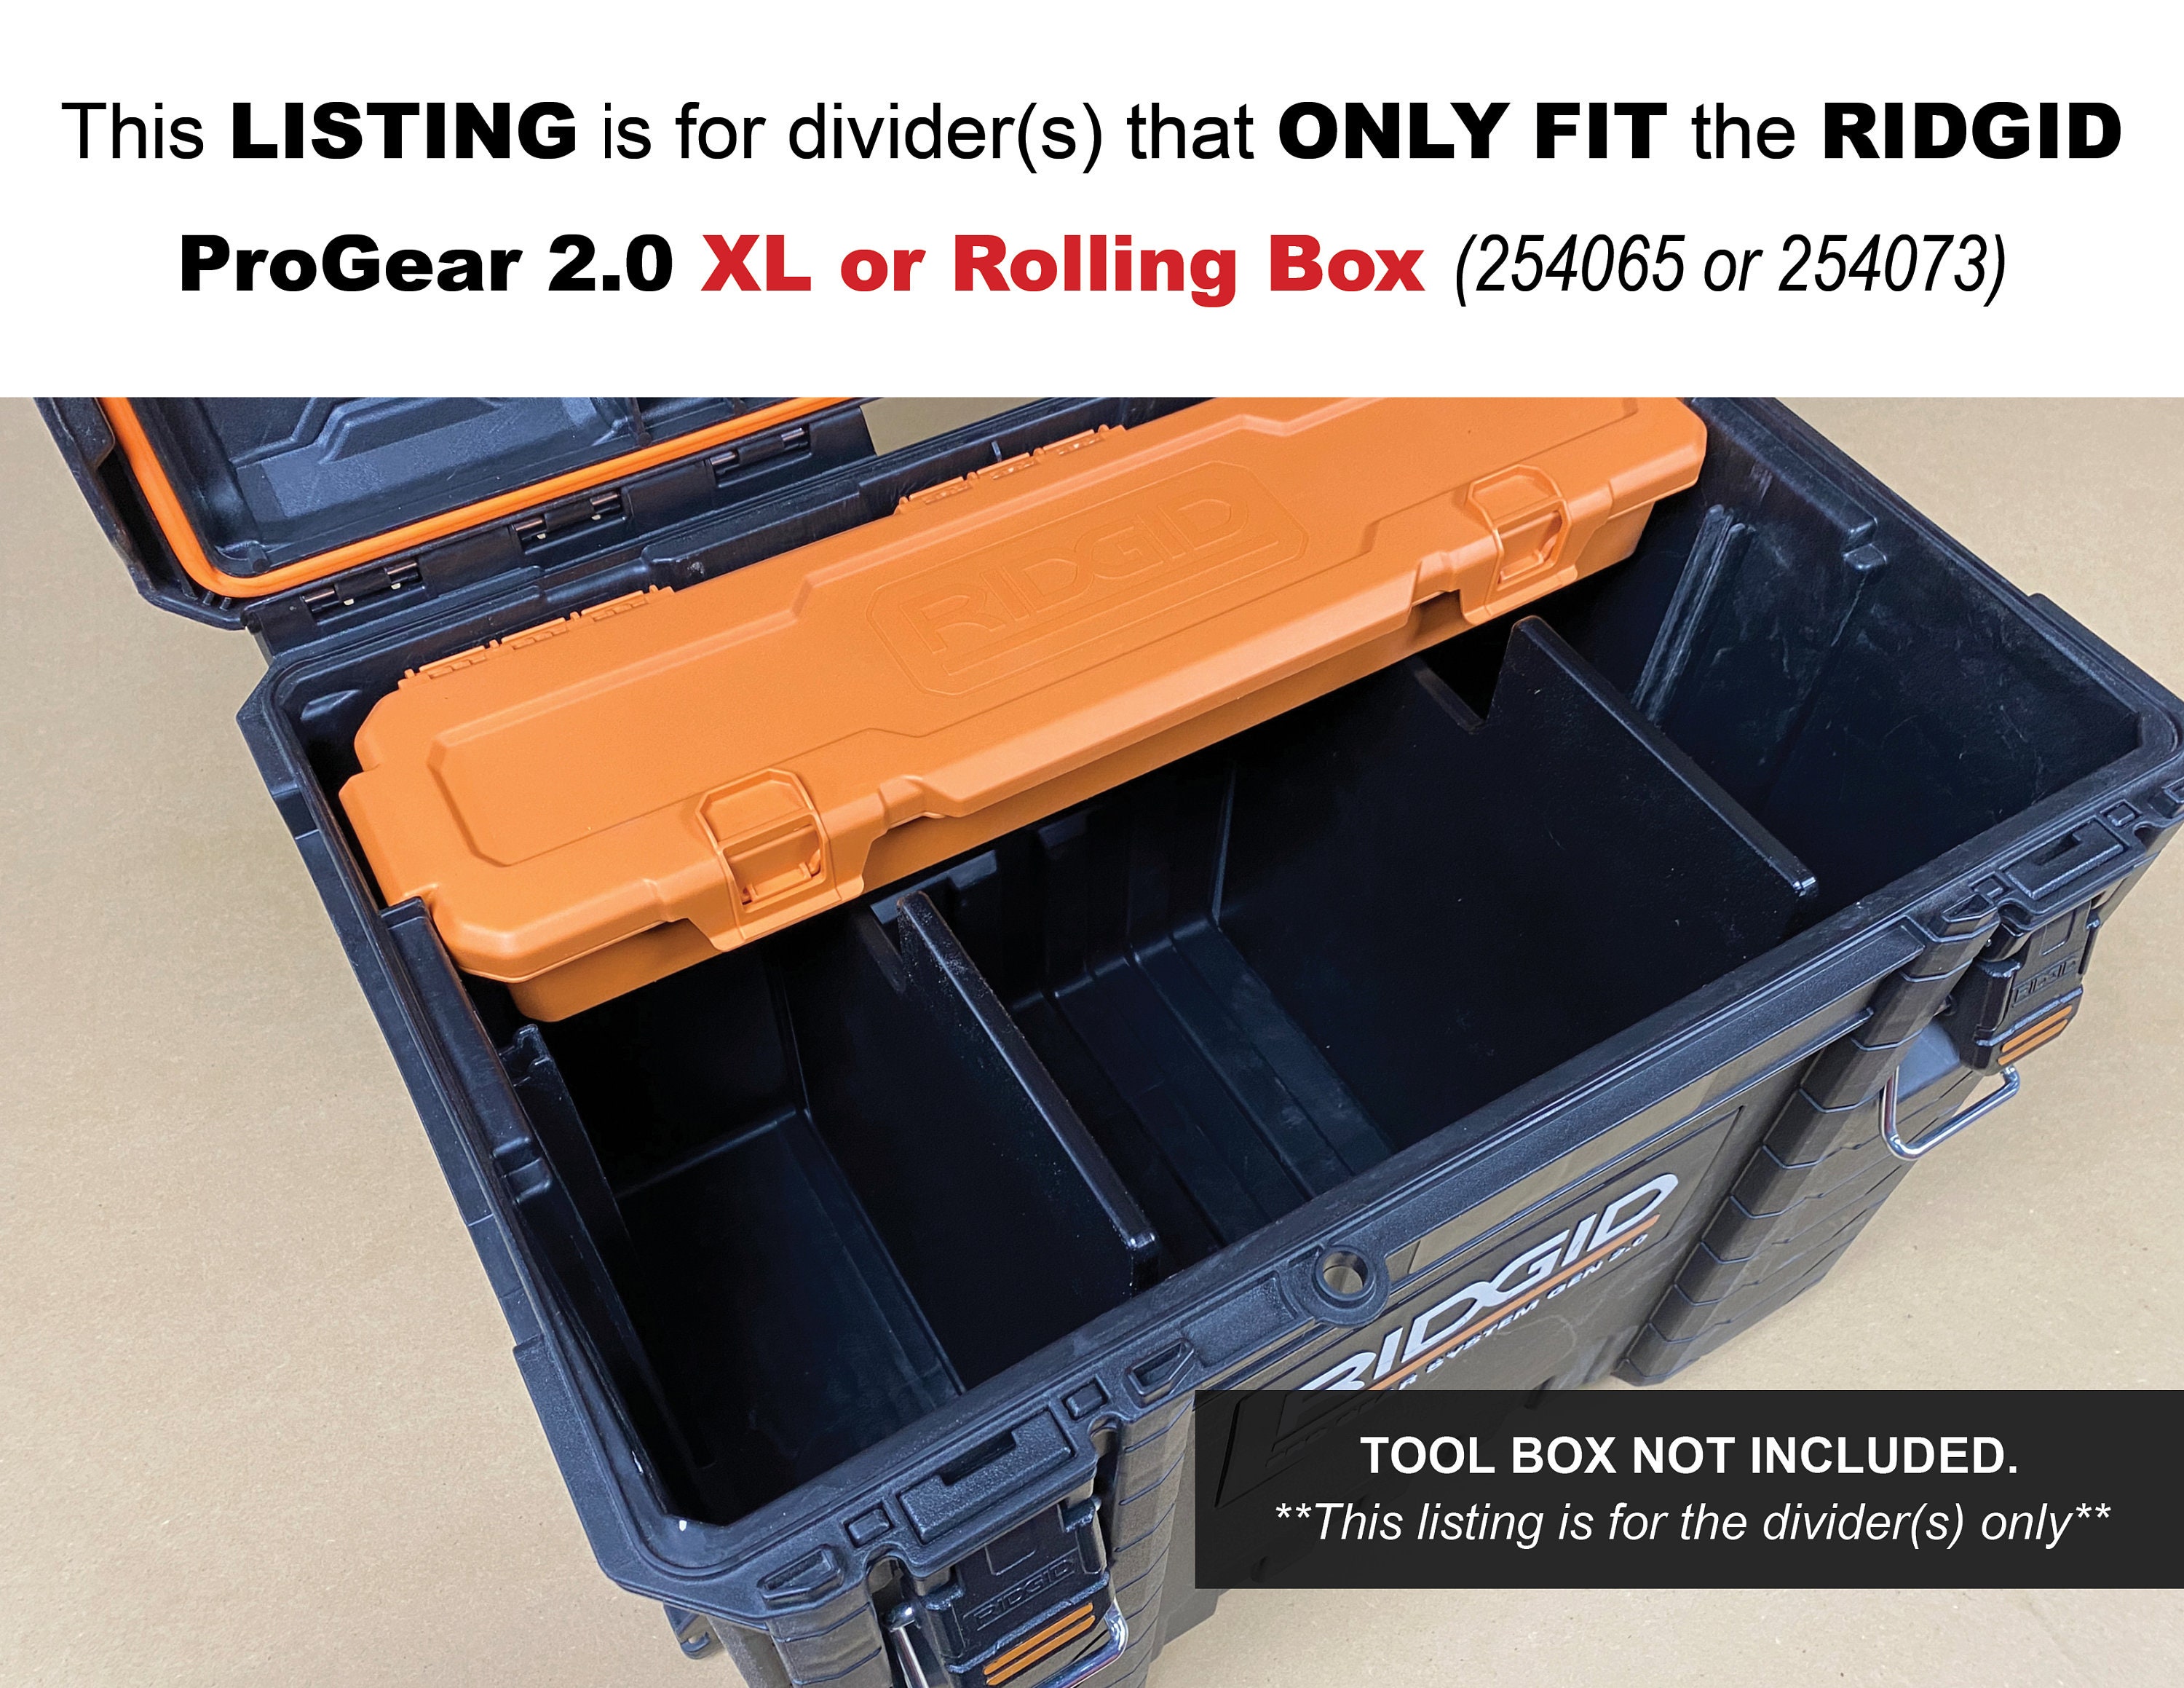 Dividers for Ridgid 2.0 Pro Gear Rolling Tool Box or XL Tool Box Tool Box  NOT Included -  Canada